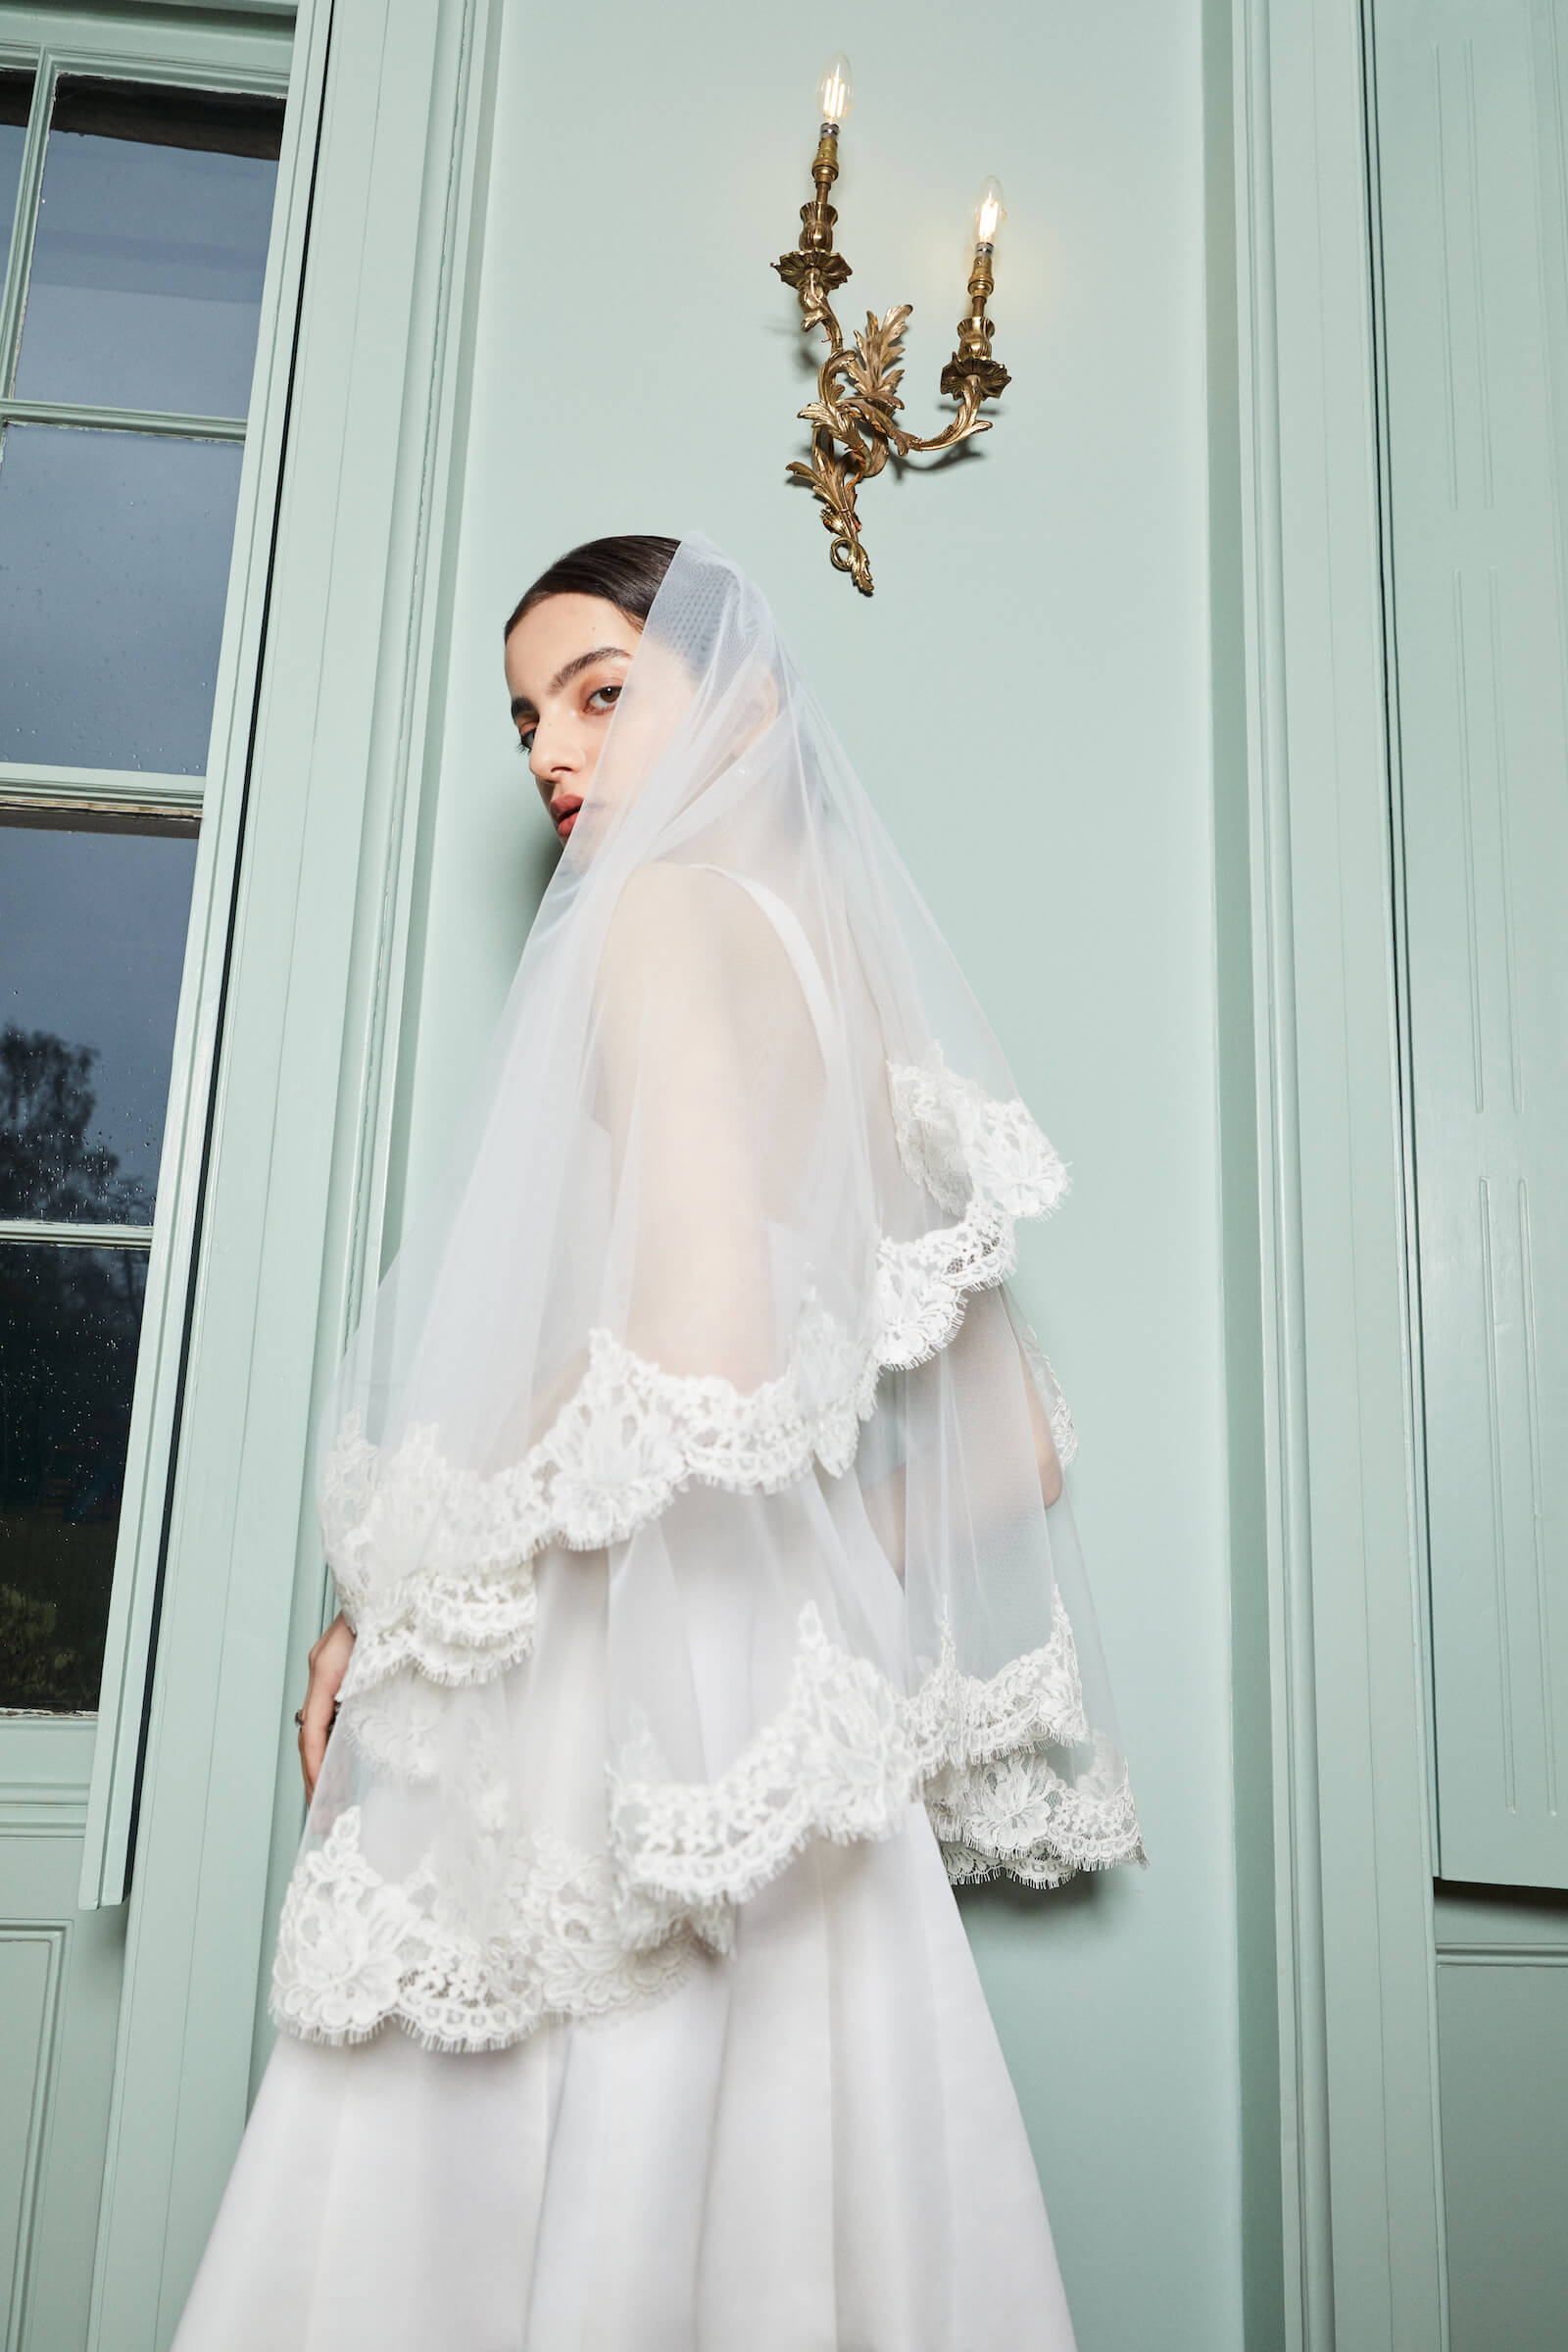 Maureen Circle Veil With Lace Edging